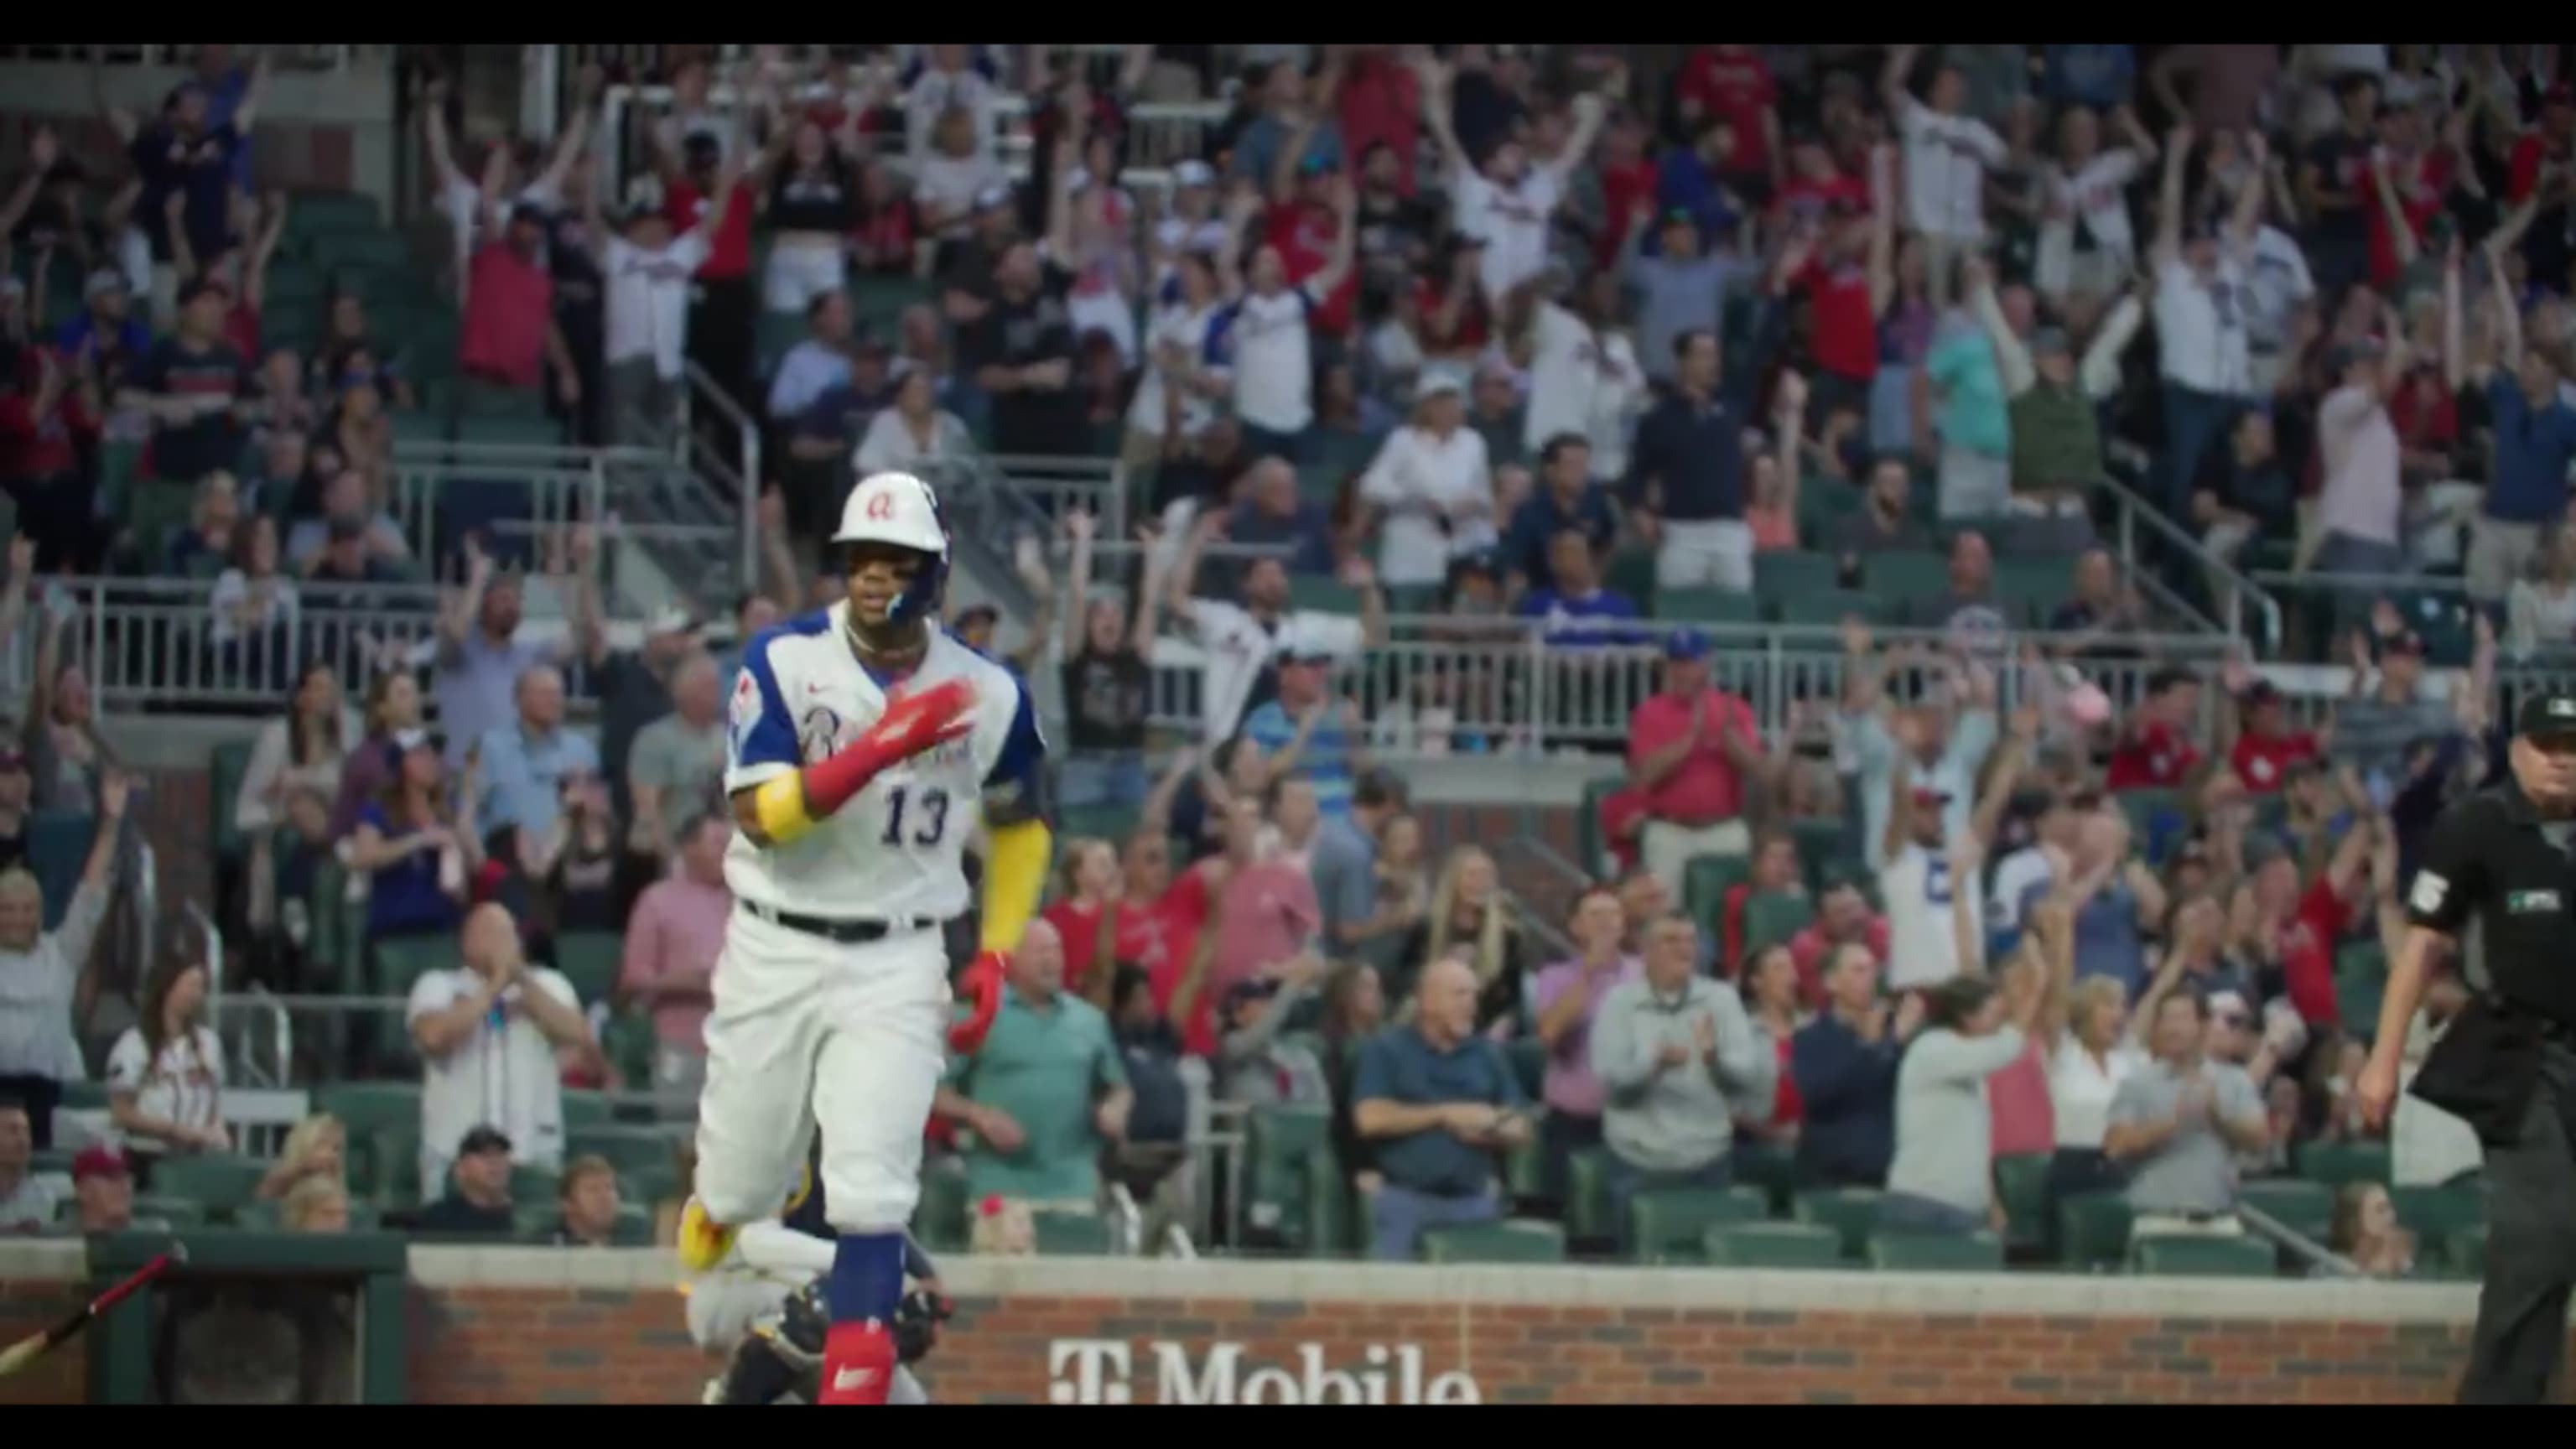 Ronald Acuña Jr. CRUSHES his first HR of season while FALLING DOWN! 